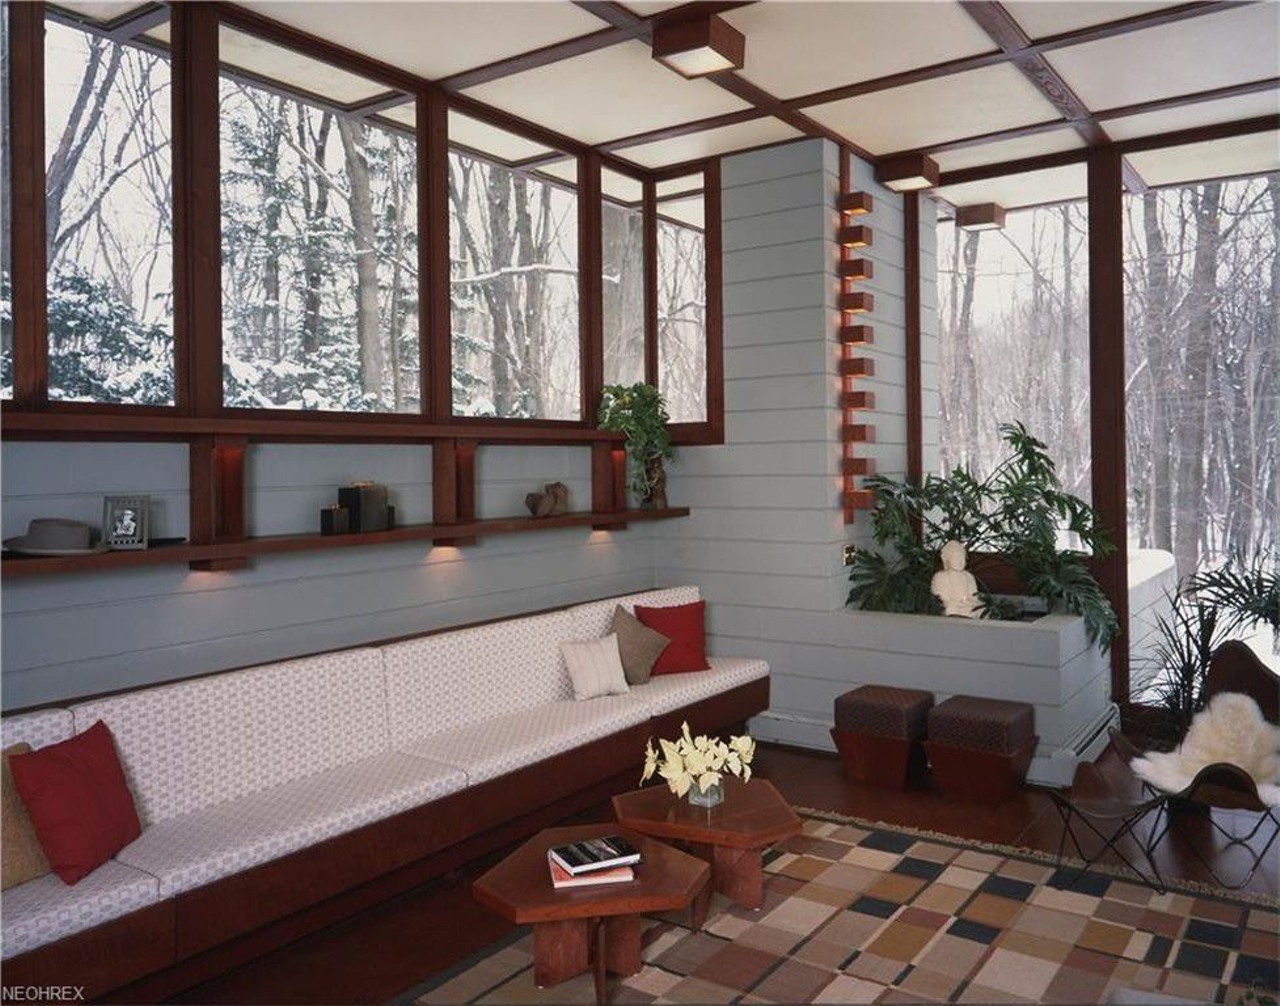 You Can Now Purchase a Frank Lloyd Wright Home in Willoughby Hills